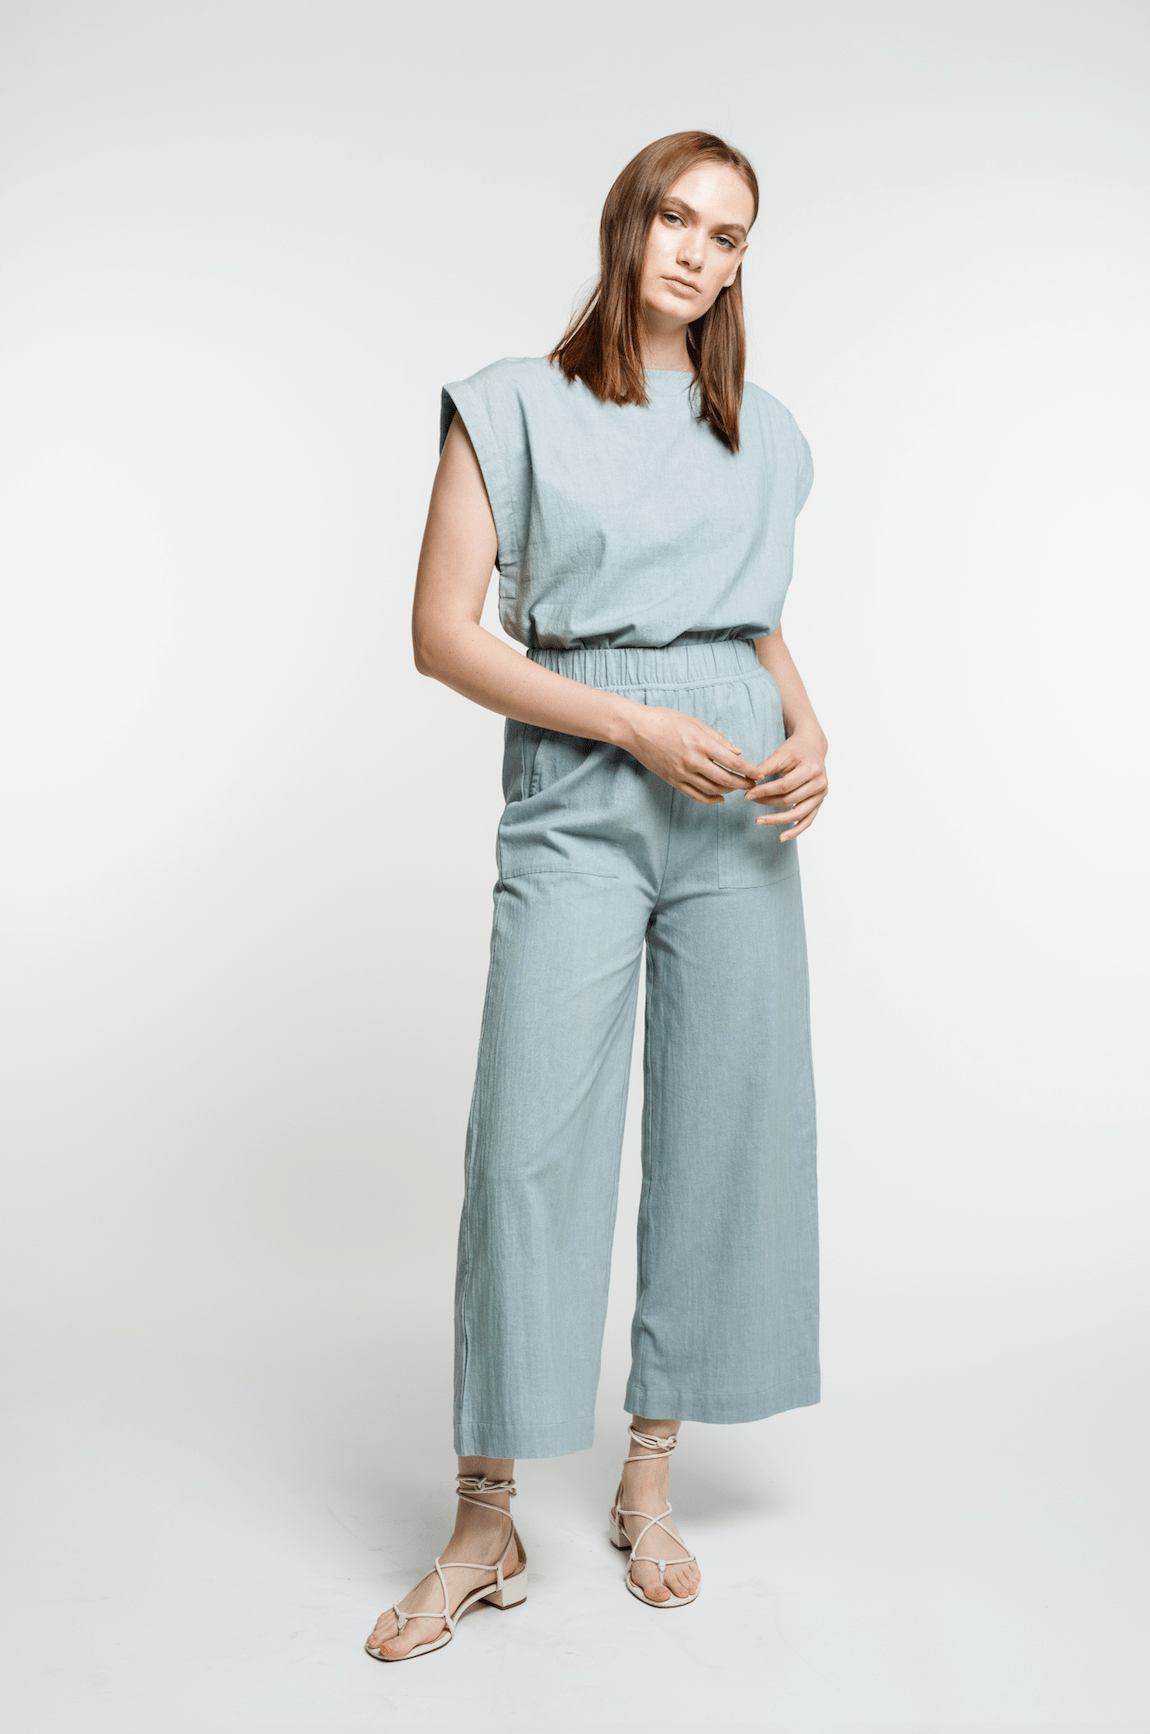 The model is wearing the Everyday Crop Pant - Cielo and sandals.